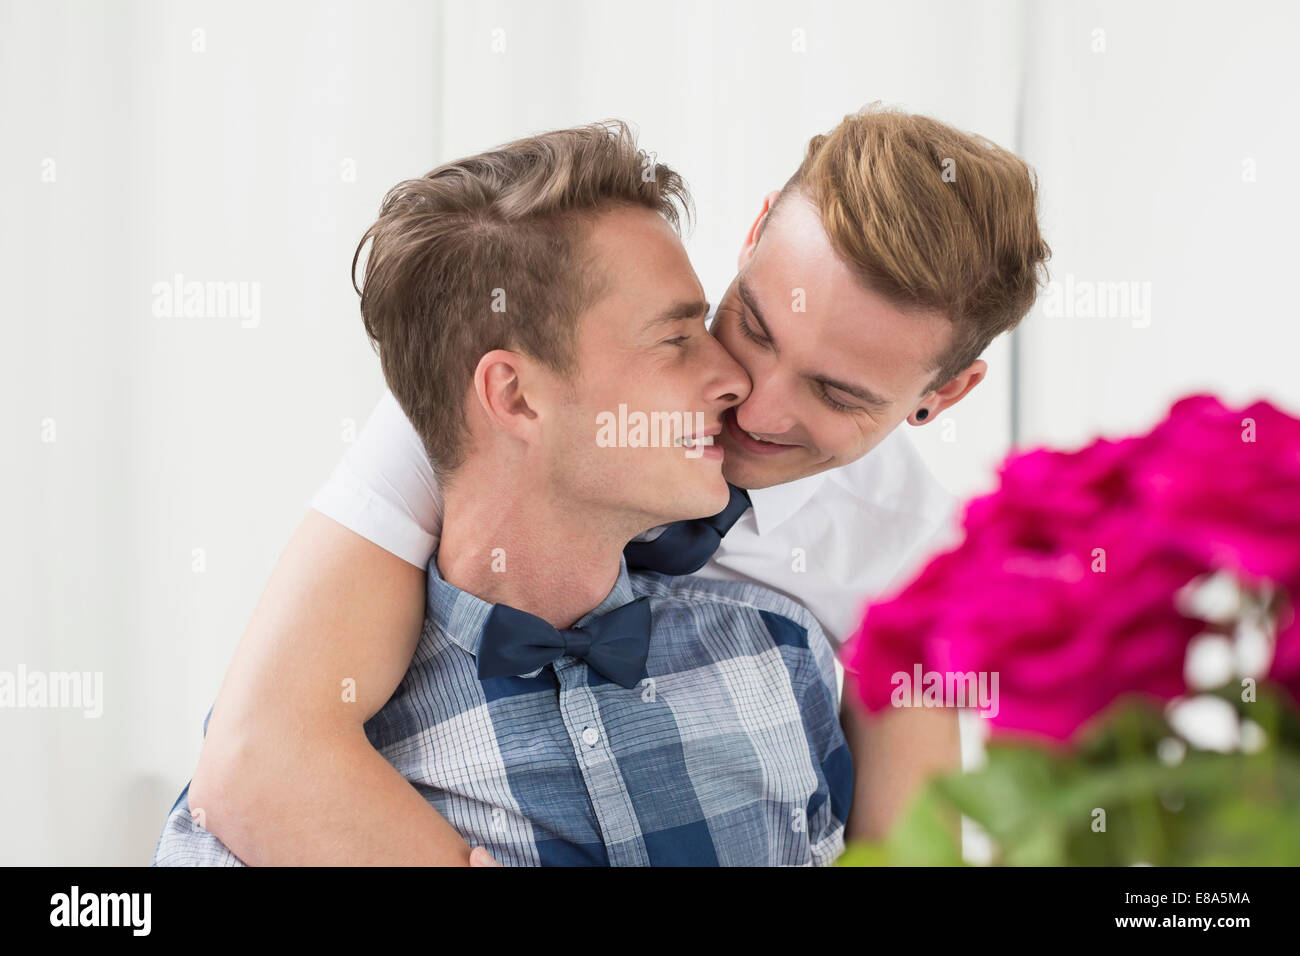 Homosexual couple kissing each other, smiling Stock Photo